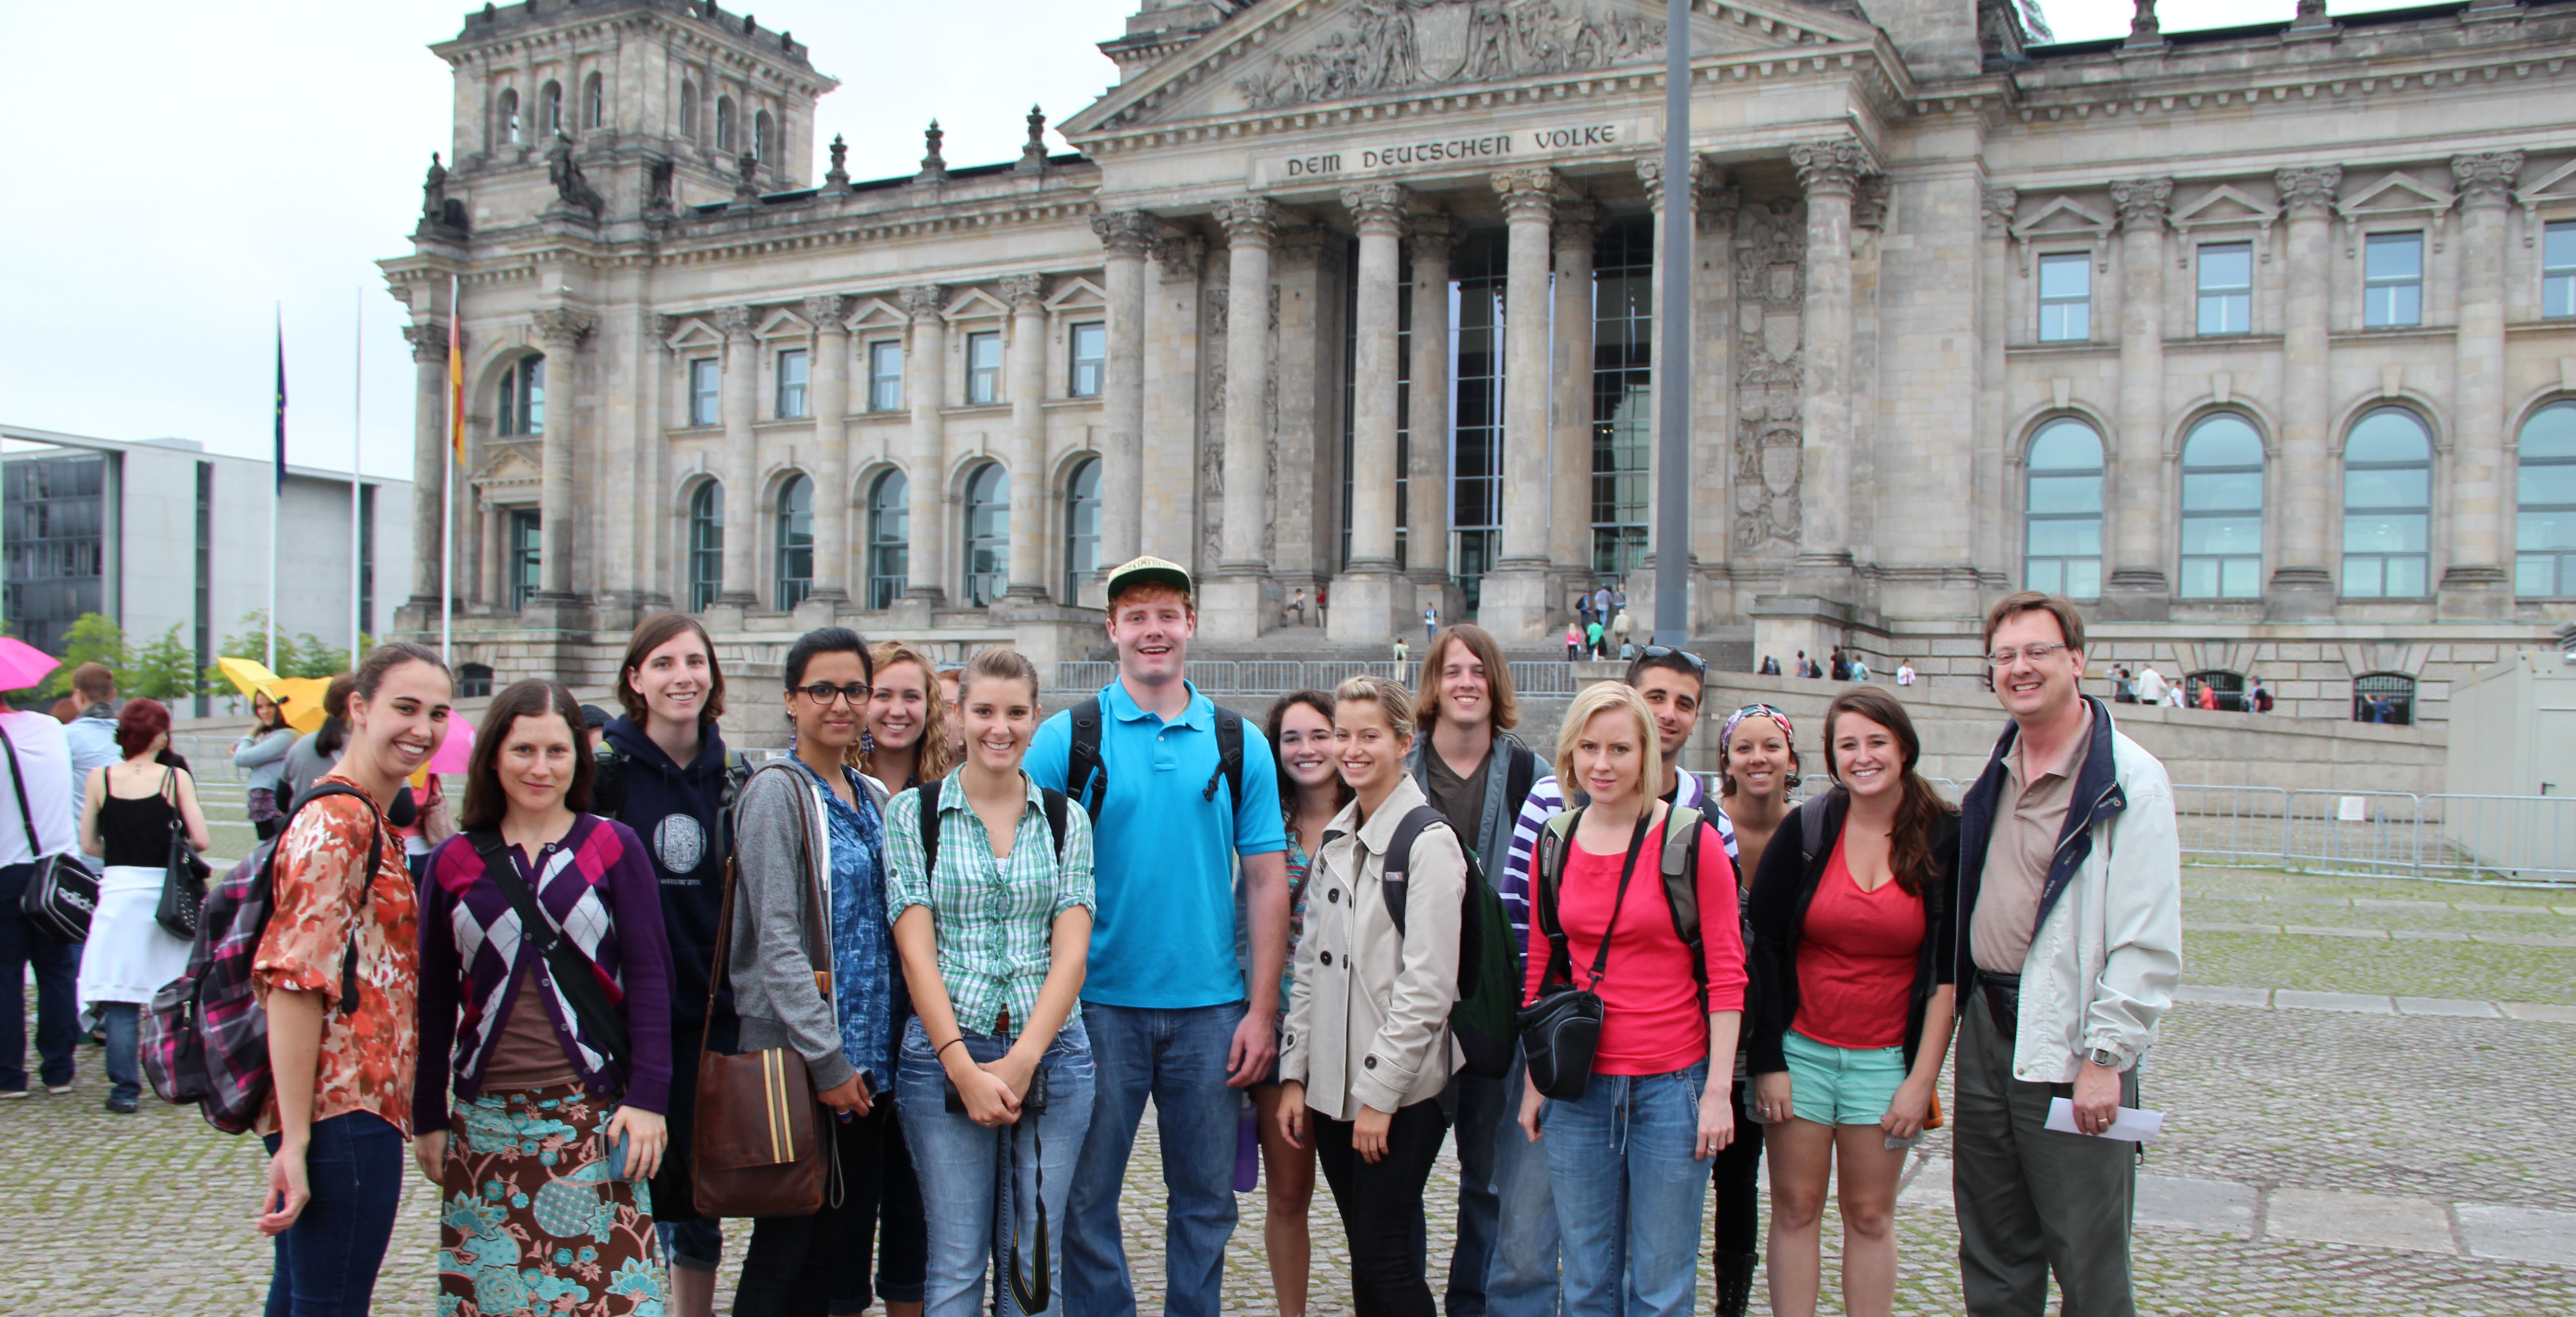 Ohio University students studying away in Germany pose at the Reichstag.